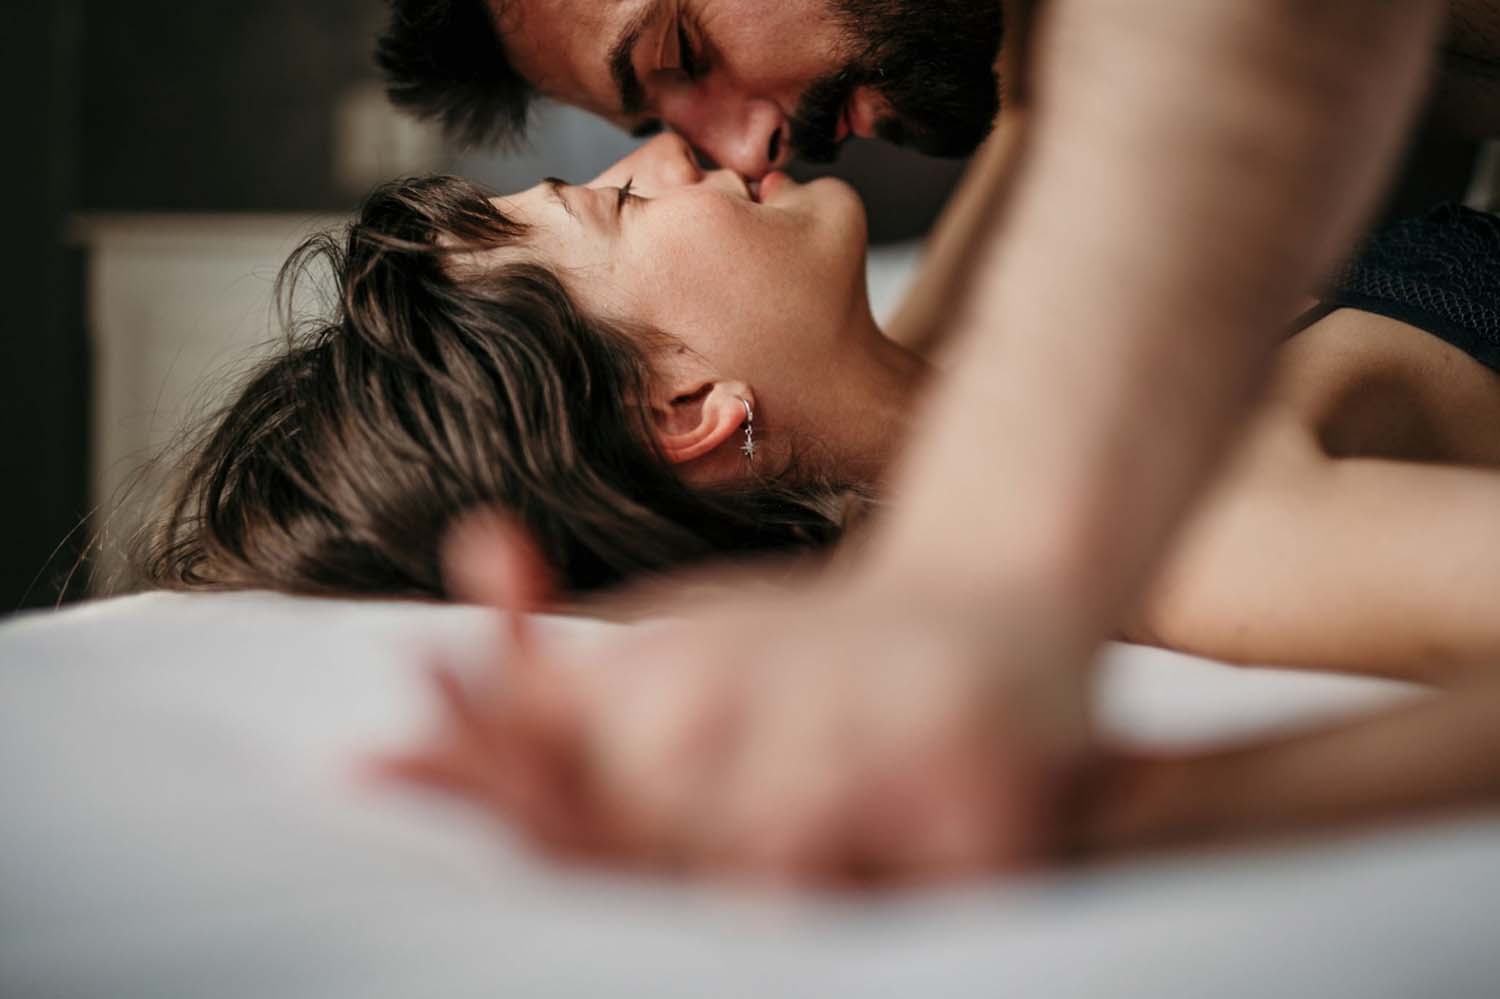 10 Deliciously Erotic Couples Foreplay GIFs to Share with Your Lover